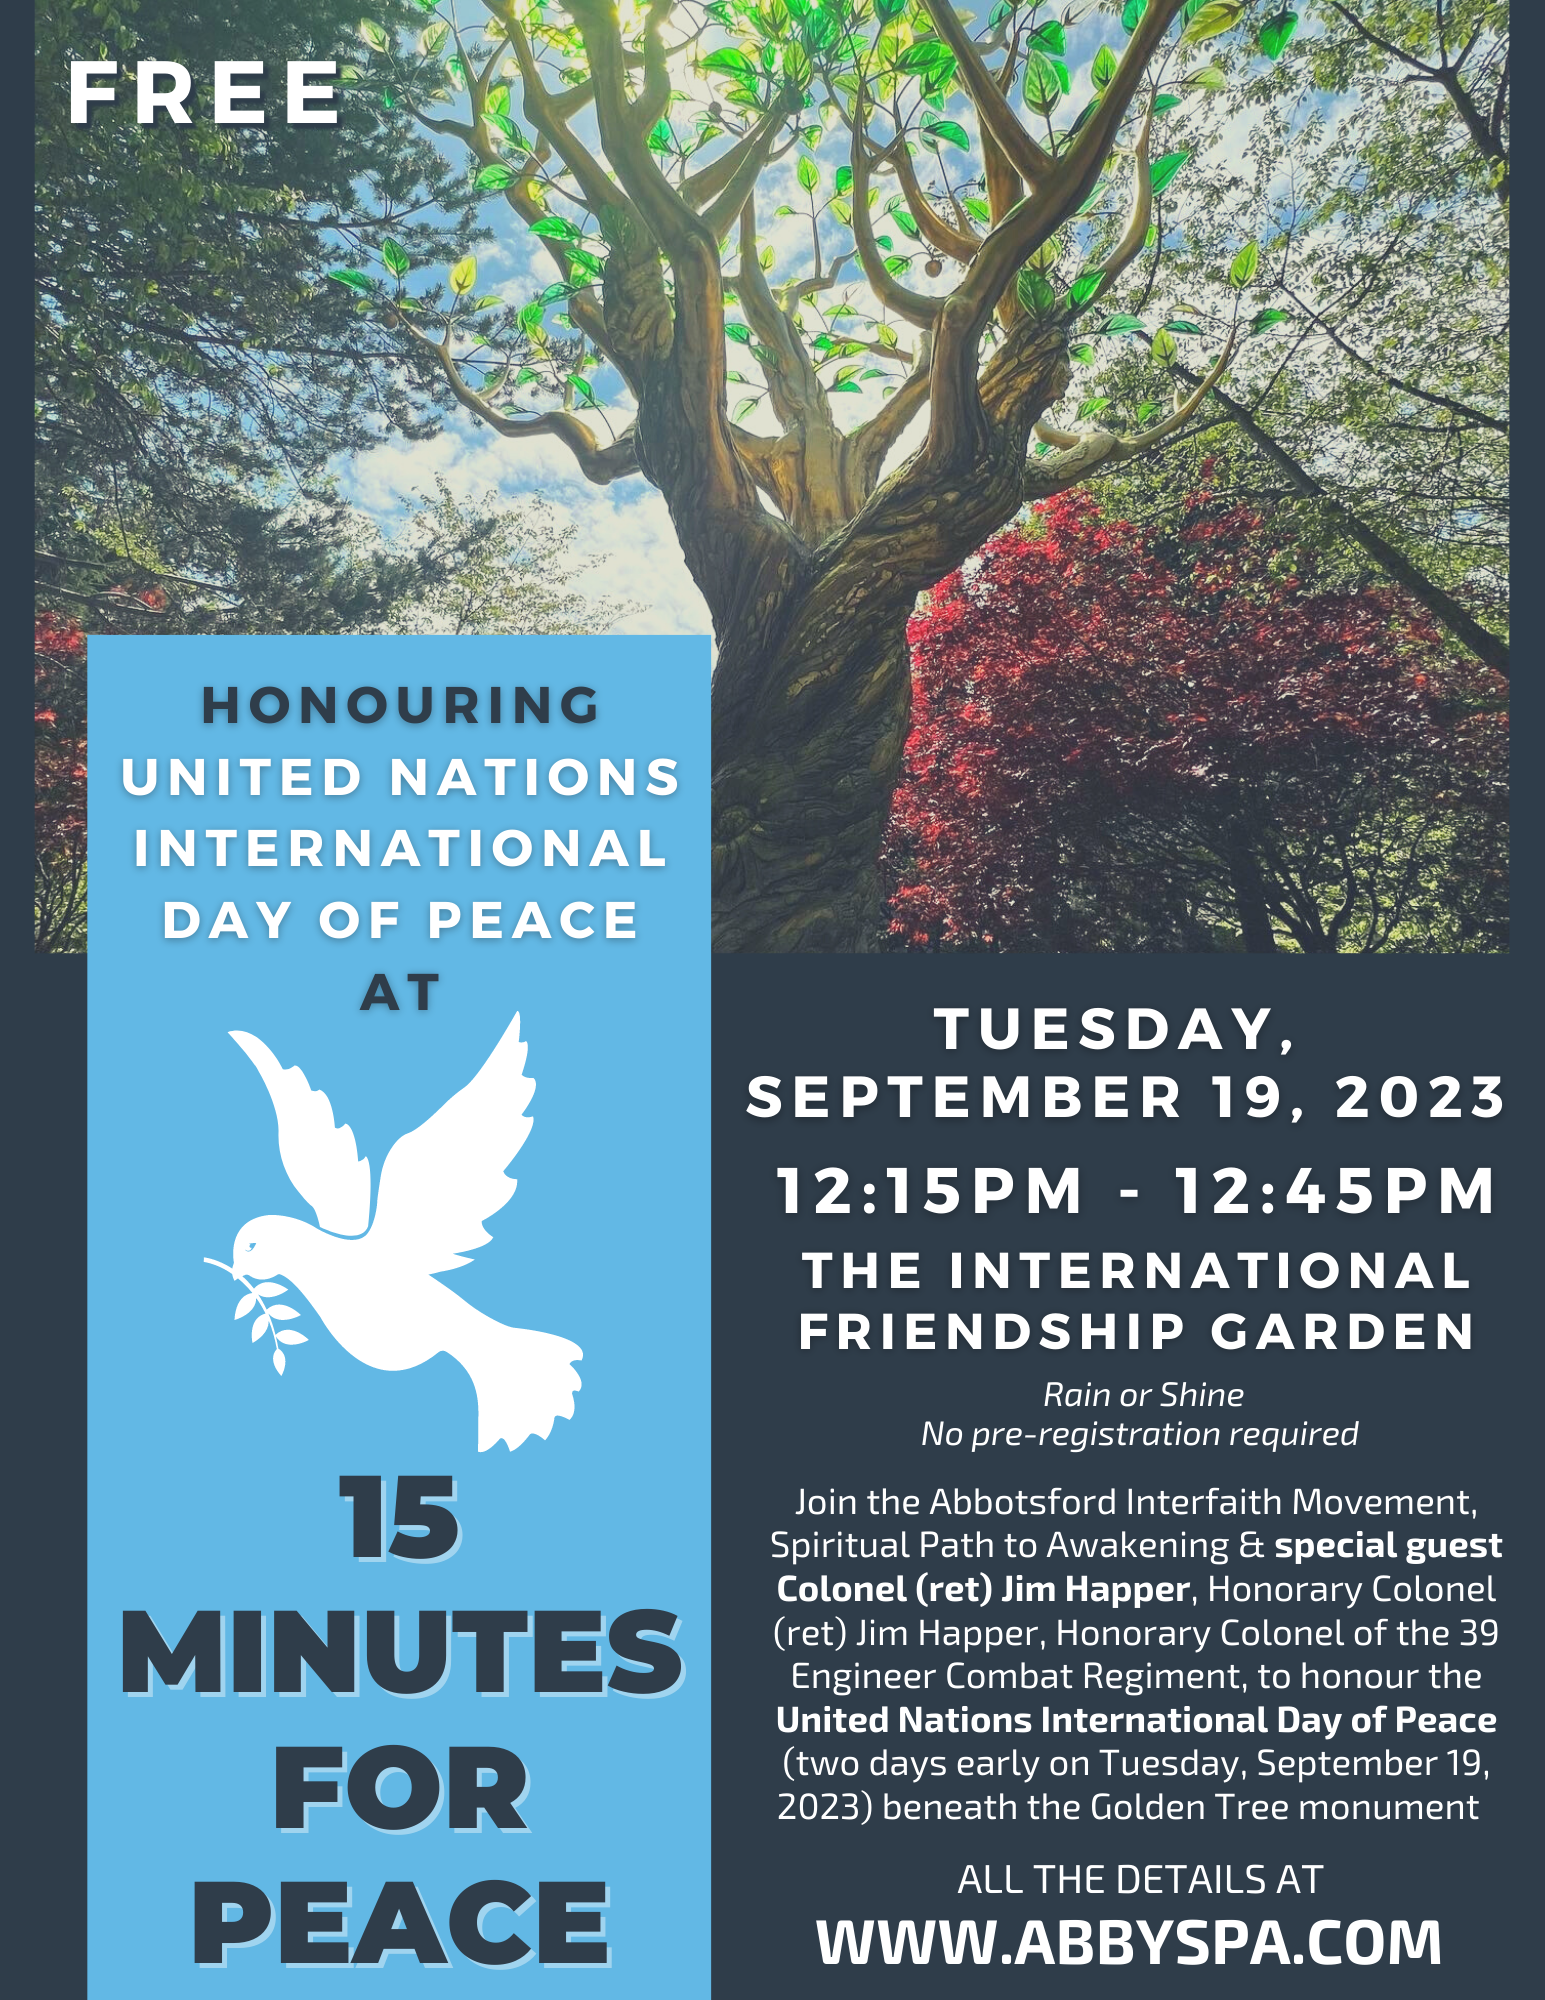 United Nations International Day of Peace at 15 MINUTES FOR PEACE